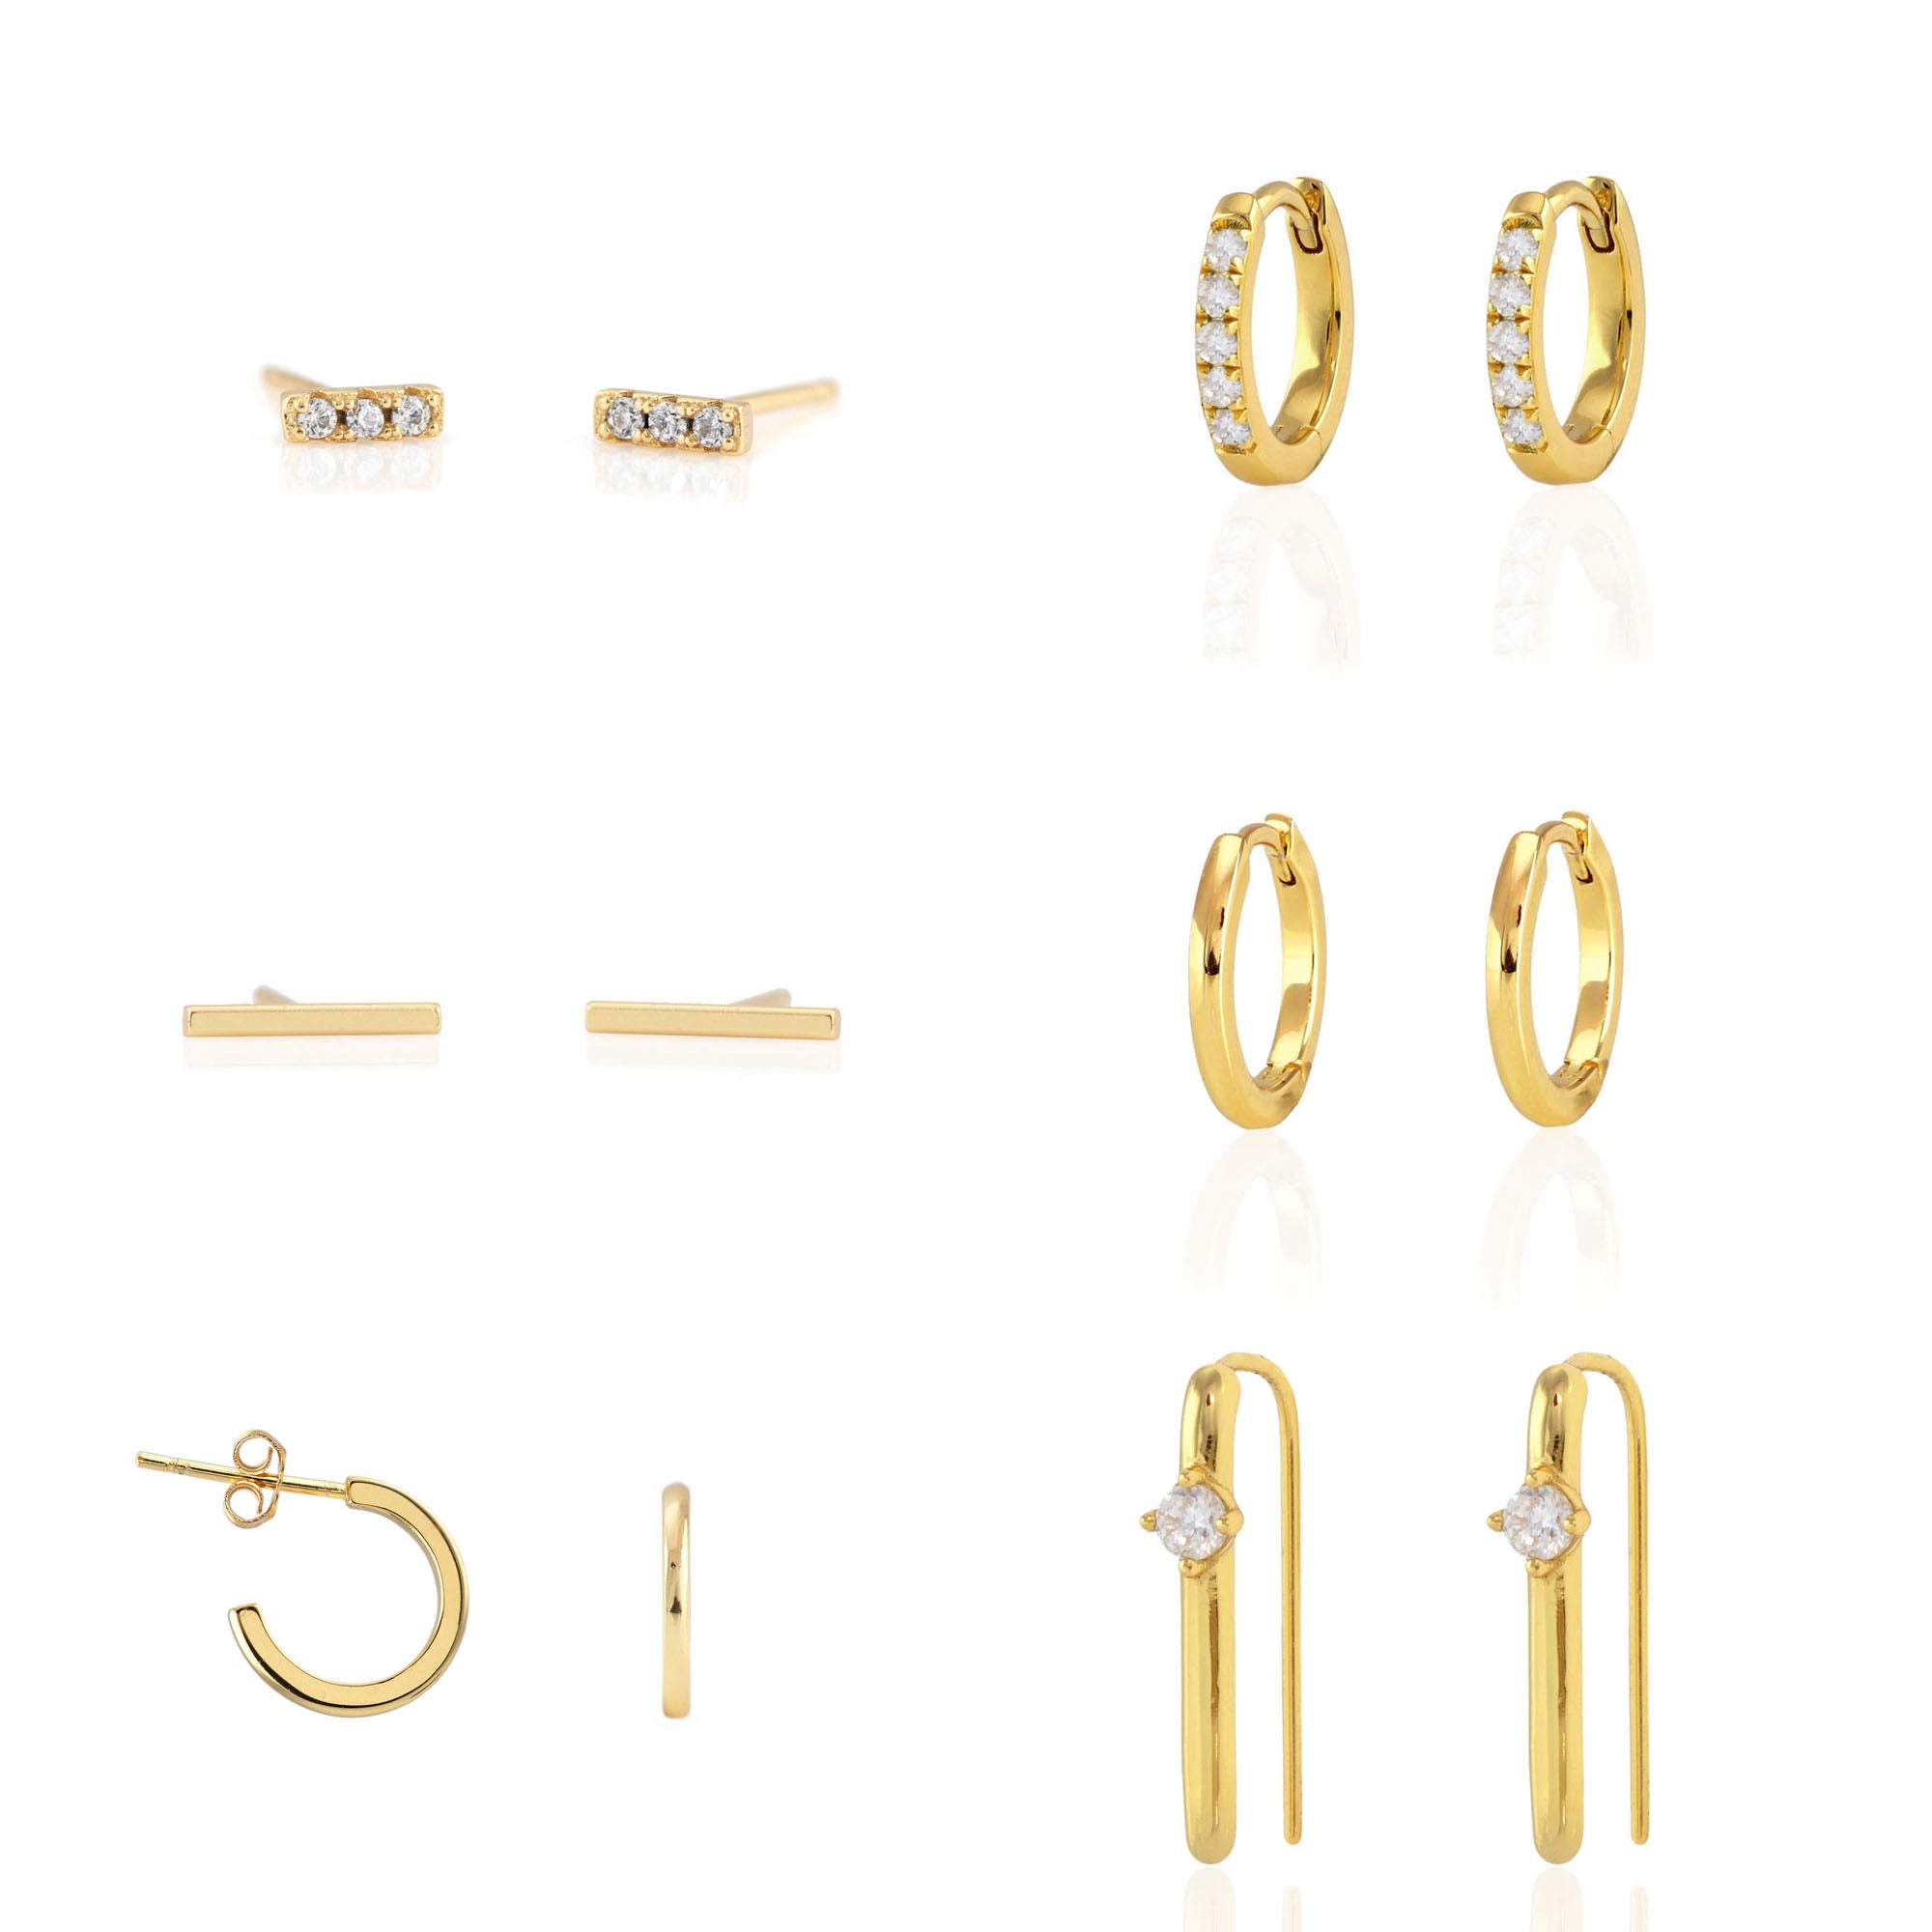 Best Selling Earring Assortment + Free Display